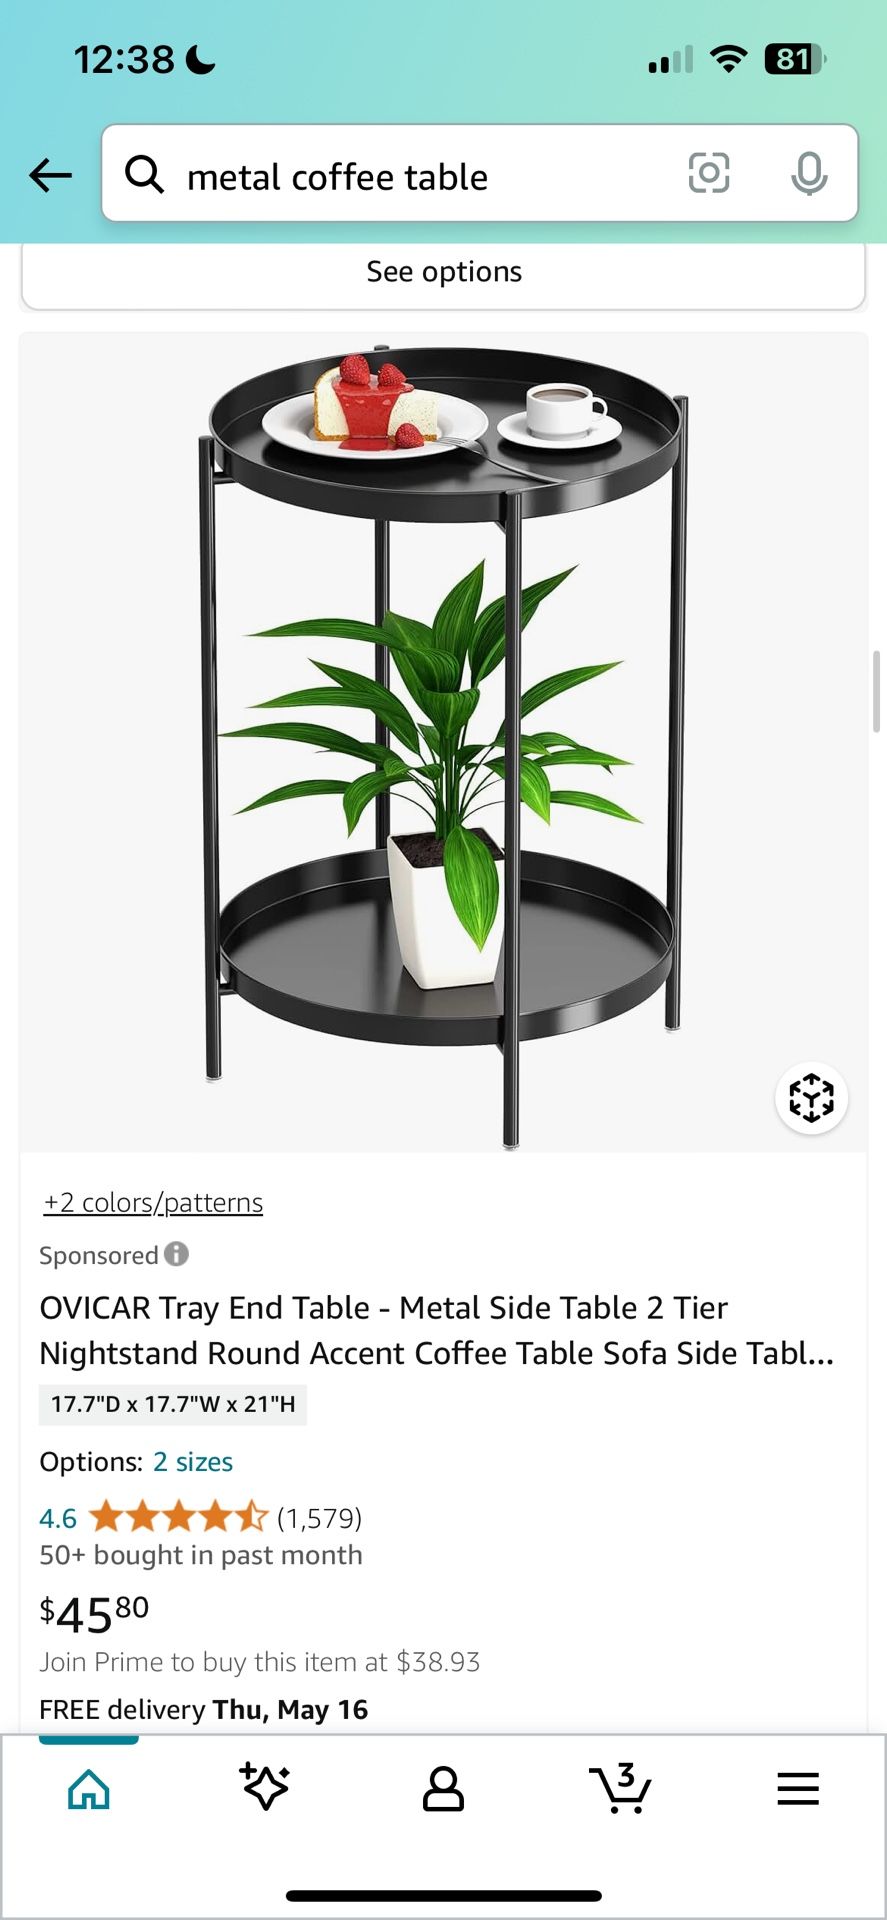 Tray End Table - Metal Side Table 2 Tier Nightstand Round Accent Coffee Table Sofa Side Table Waterproof Indoor Outdoor Snack Table